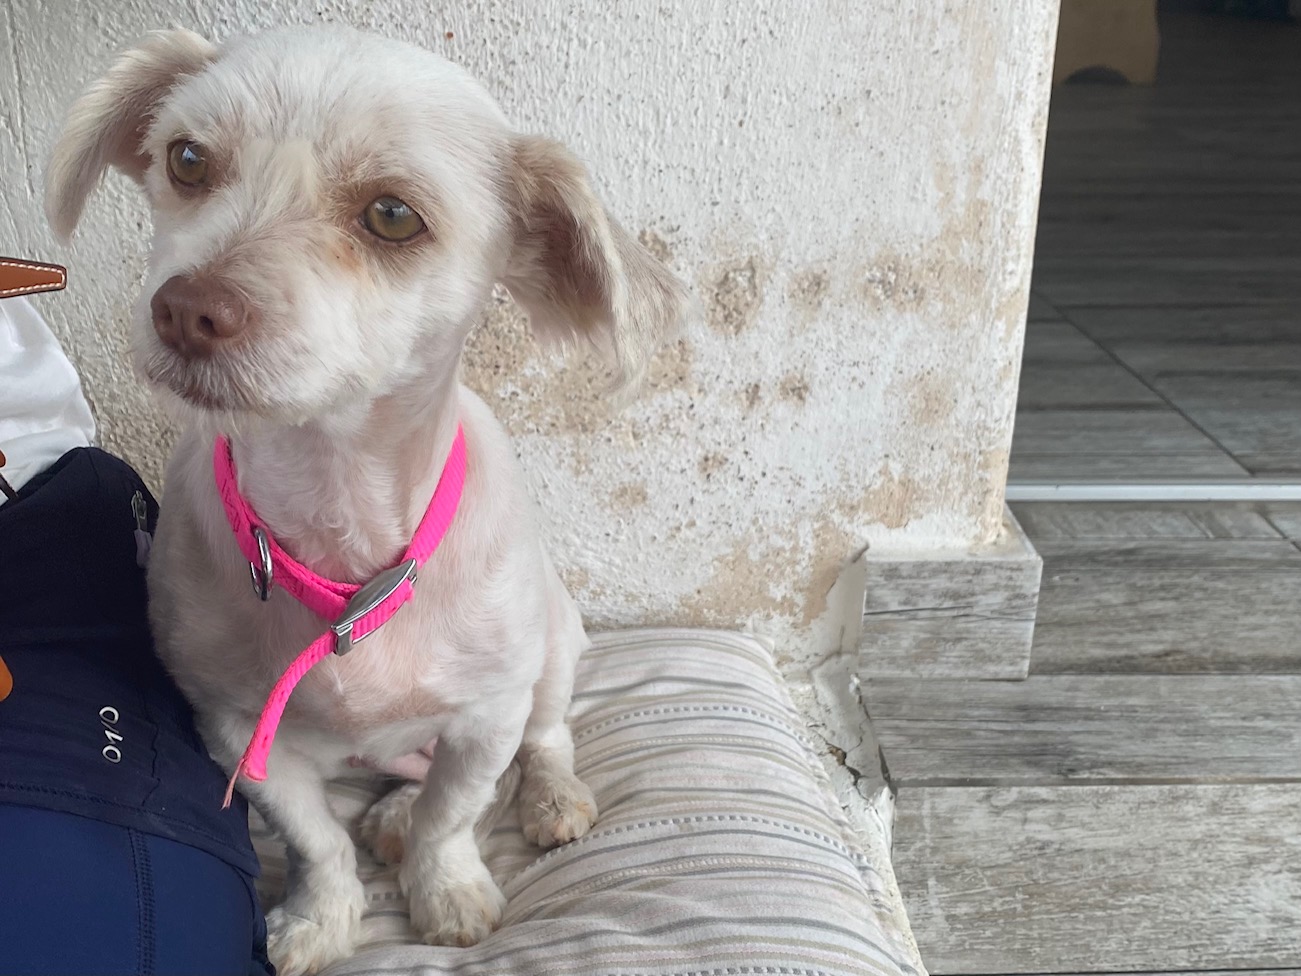 Small white dog with short hair and a bright pink collar